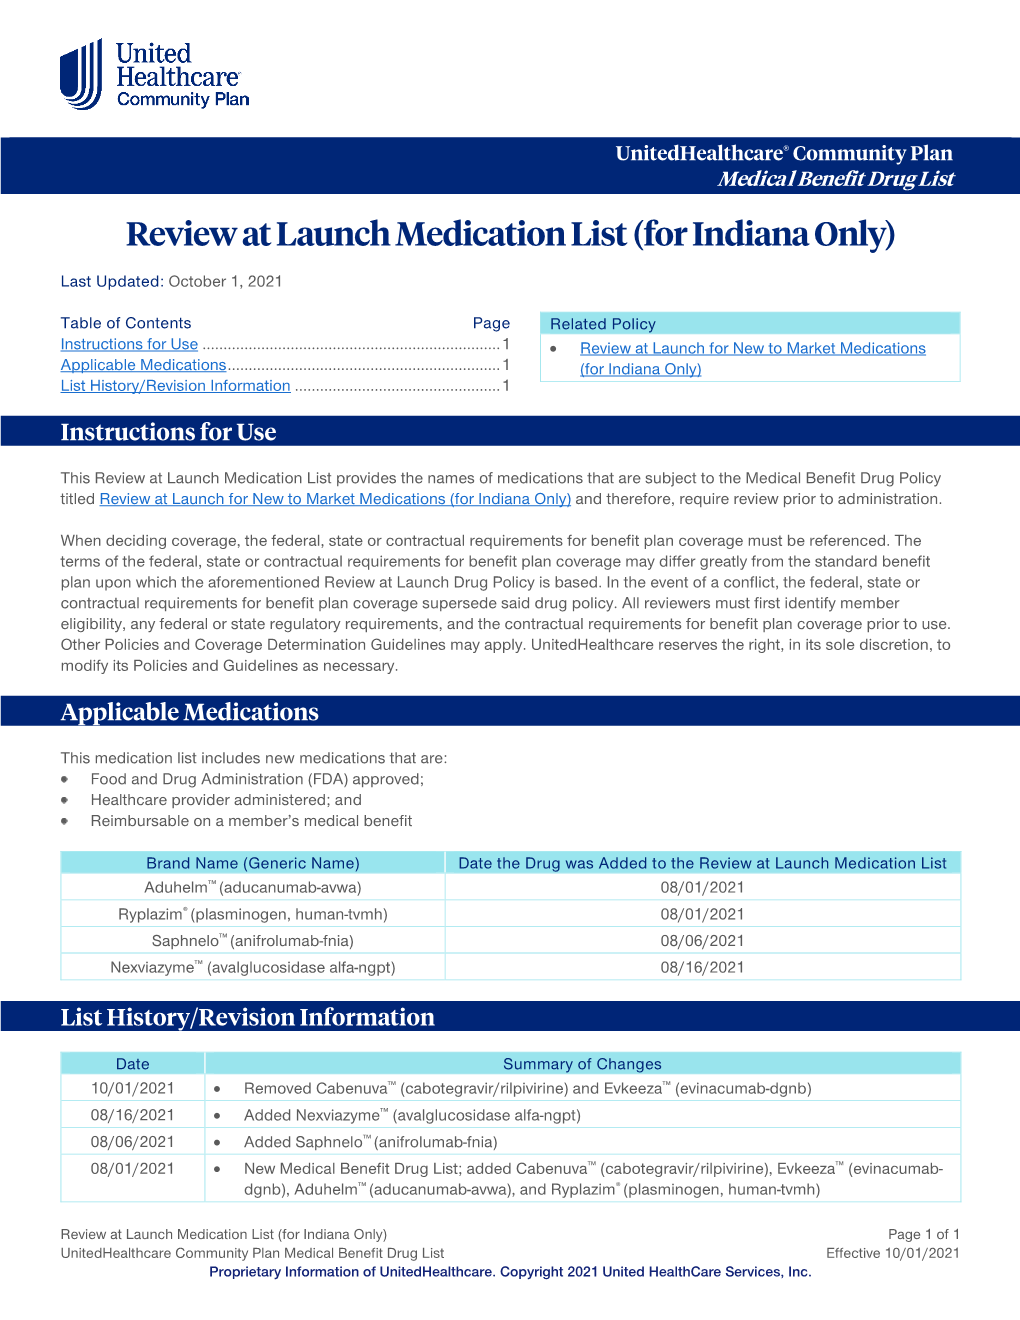 Review at Launch Medication List (For Indiana Only)